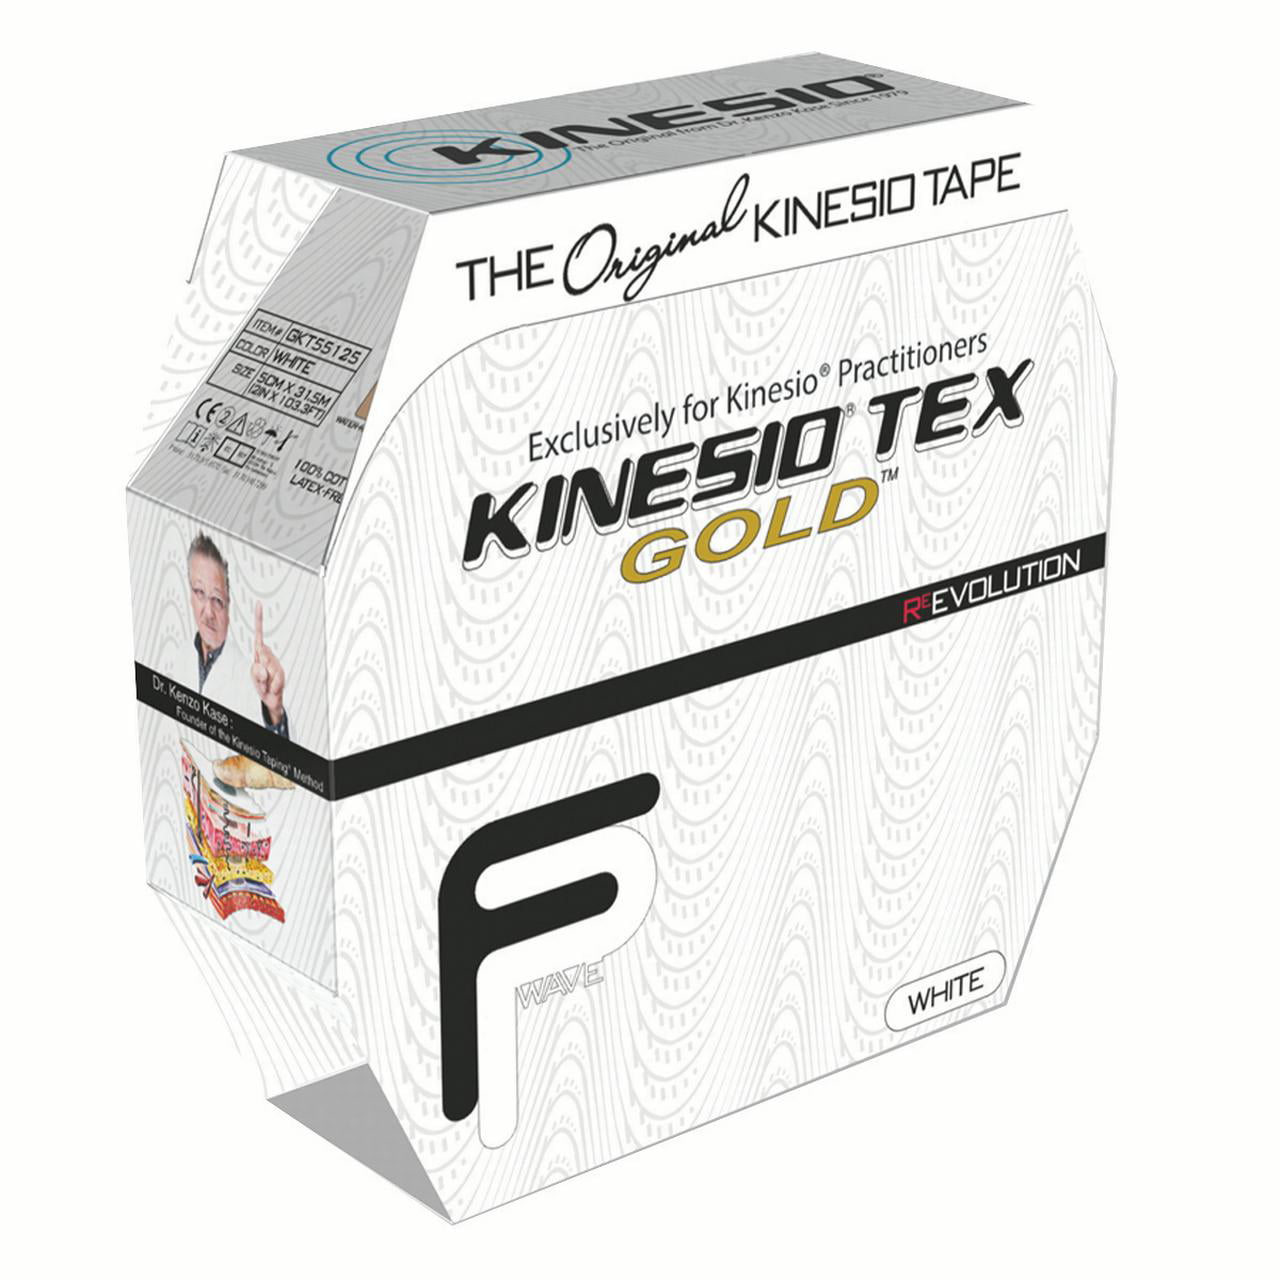 KINESIO TEX GOLD FP TAPE 2" x 5 1/2yds KINESIOLOGY SPORTS TAPE ALL COLORS 2 pack 